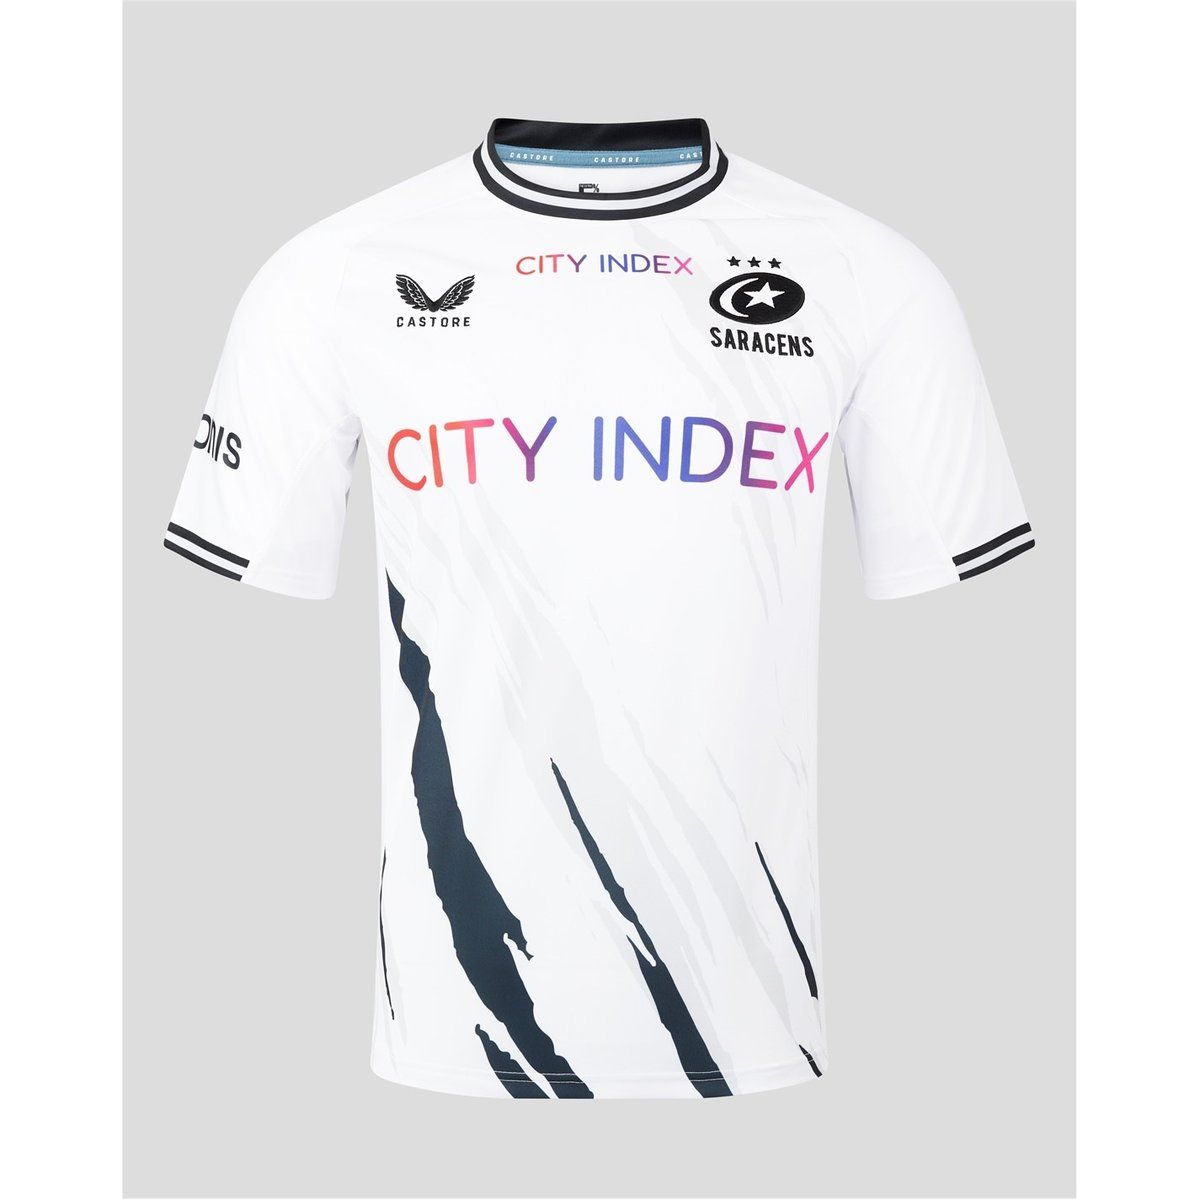 Gallagher Premiership Rugby Shirts and Clothing